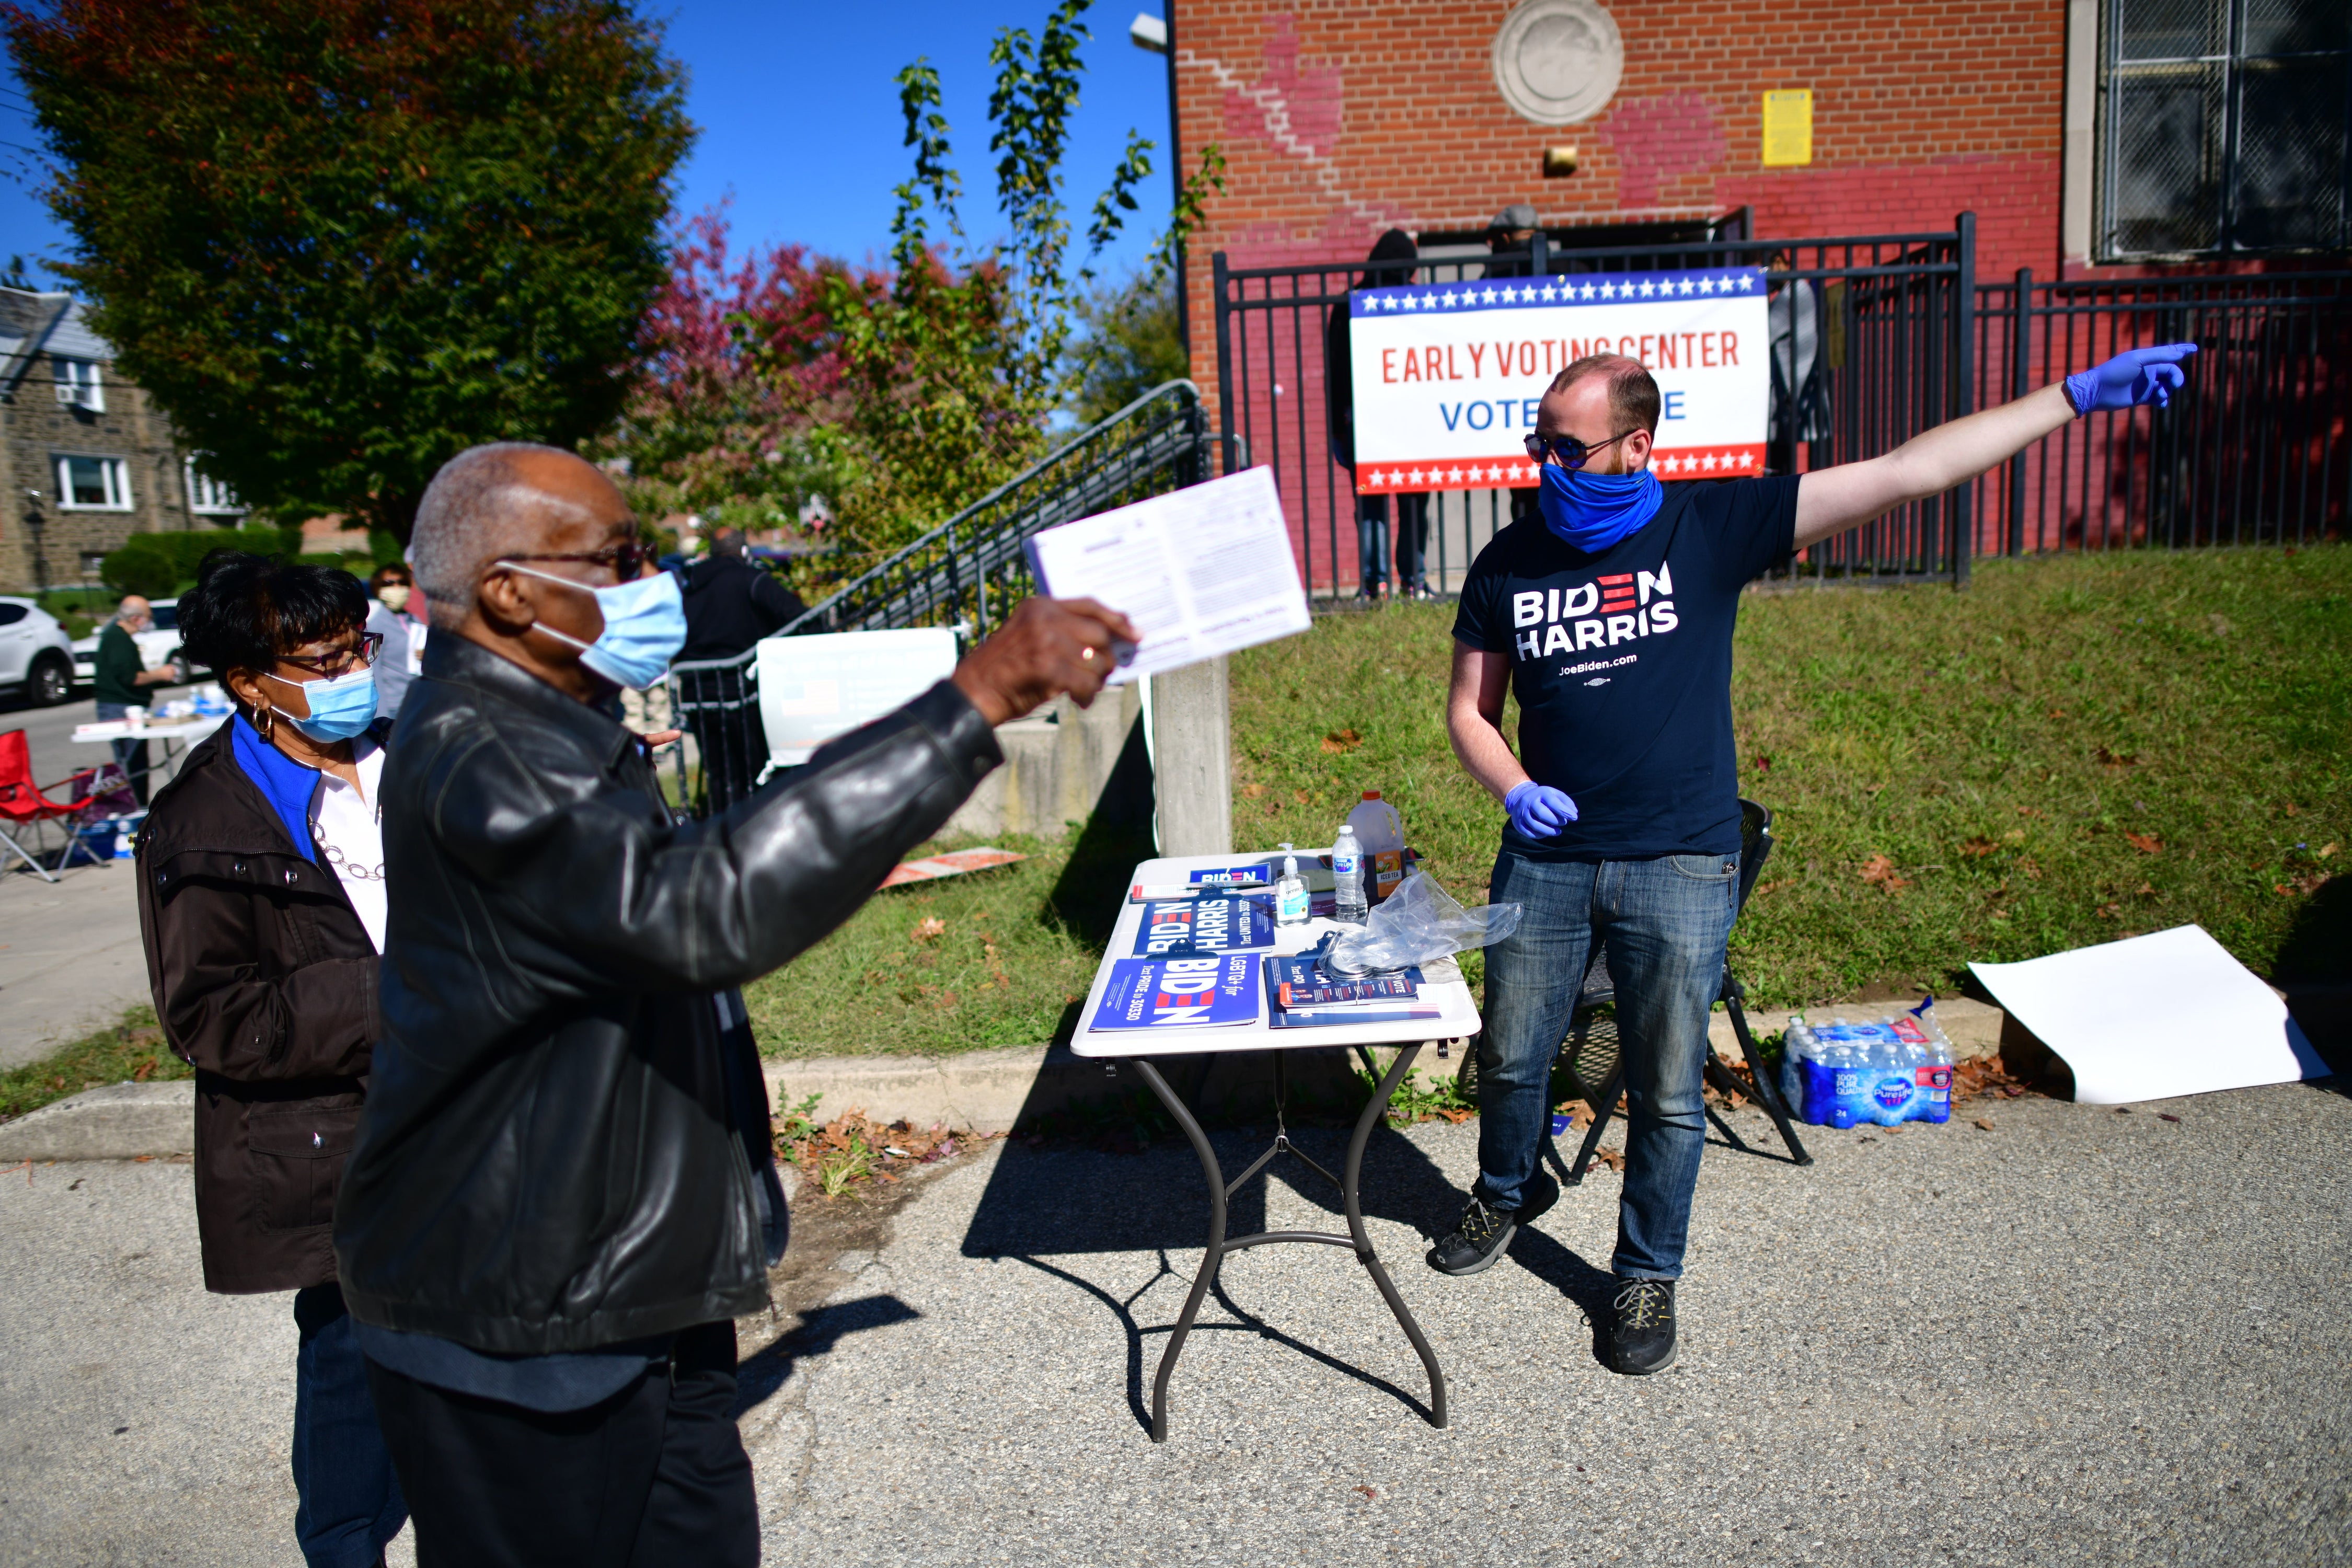 A Biden campaign volunteer directs early voters at the A B Day School poll in Philadelphia, Pennsylvania